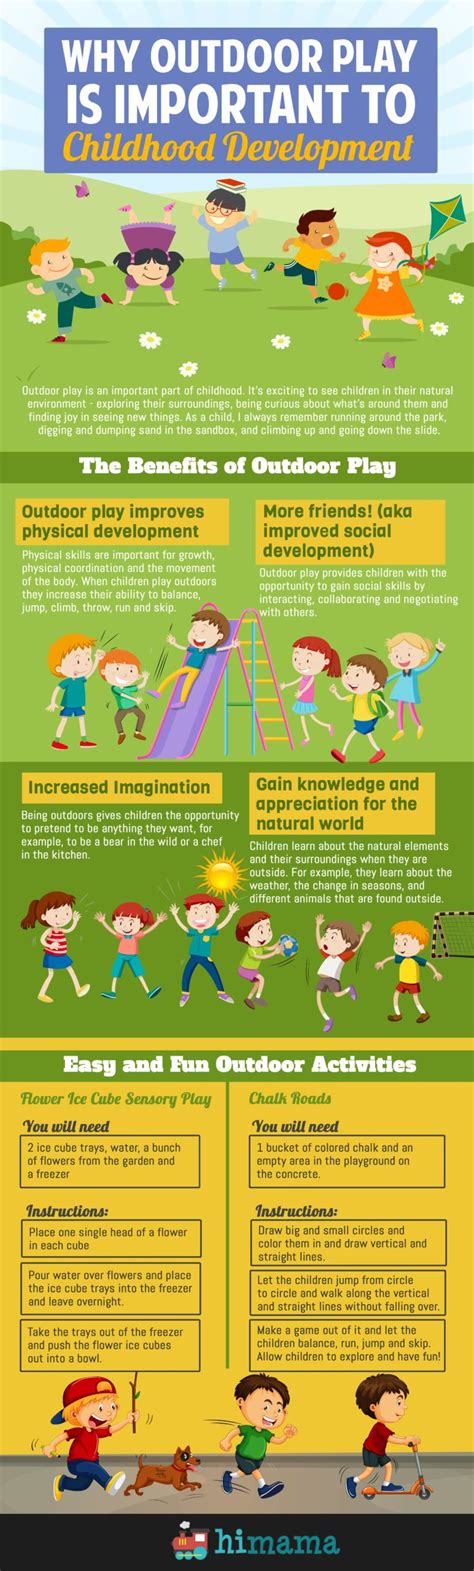 Why Outdoor Play Is Important To Childhood Development